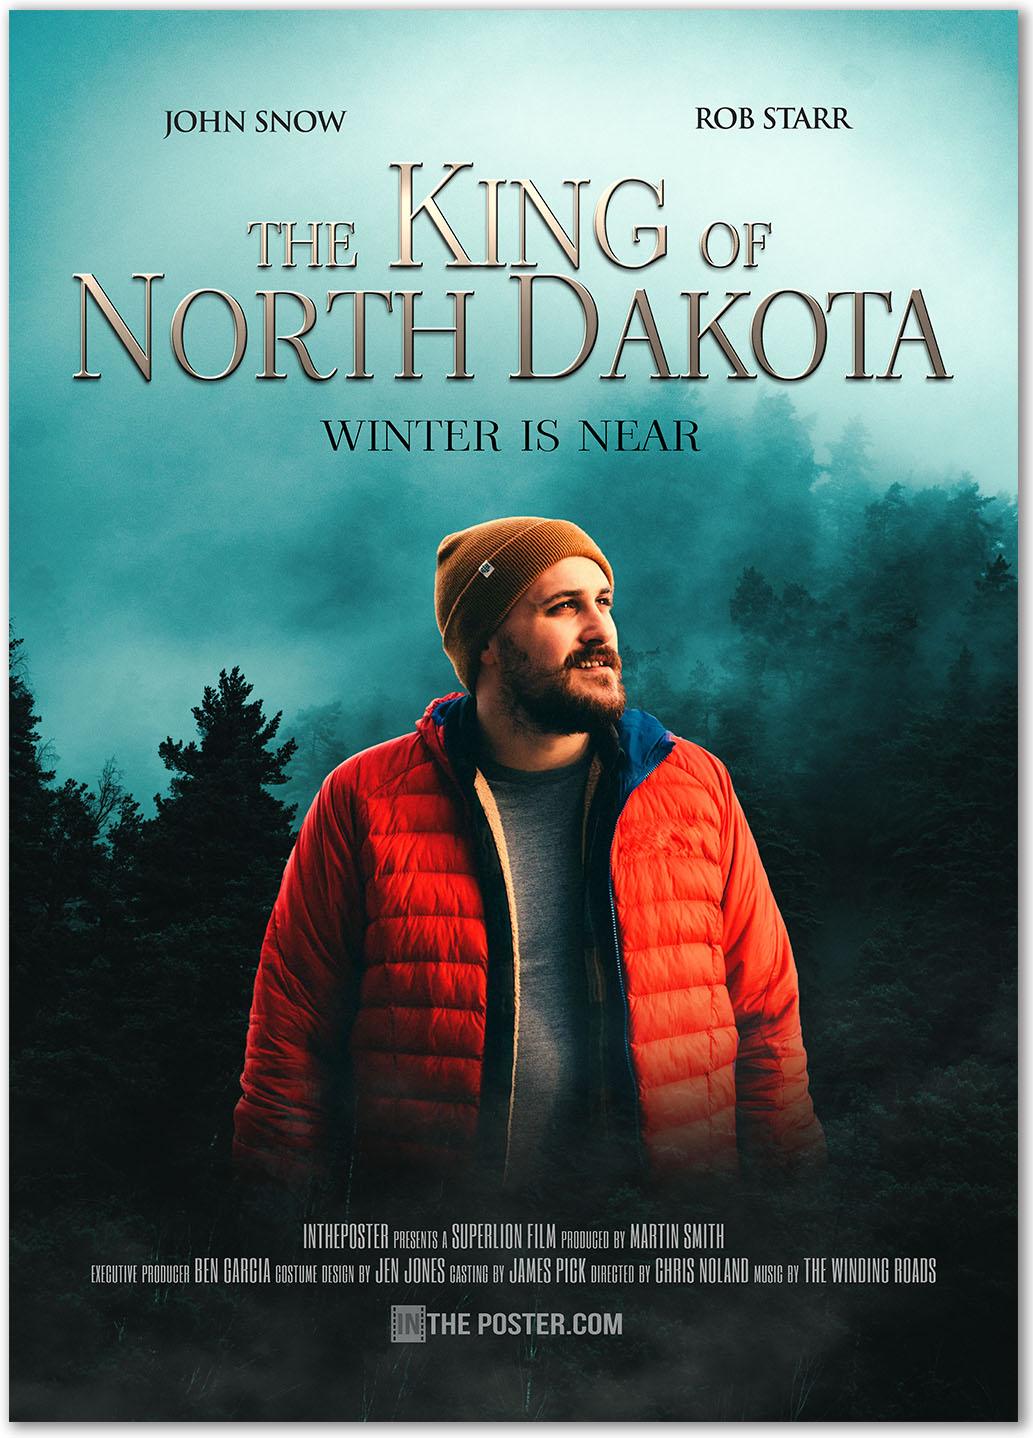 Fantasy Movie Poster design with man in an orange puffer coat and brown hat standing against a forest with mist